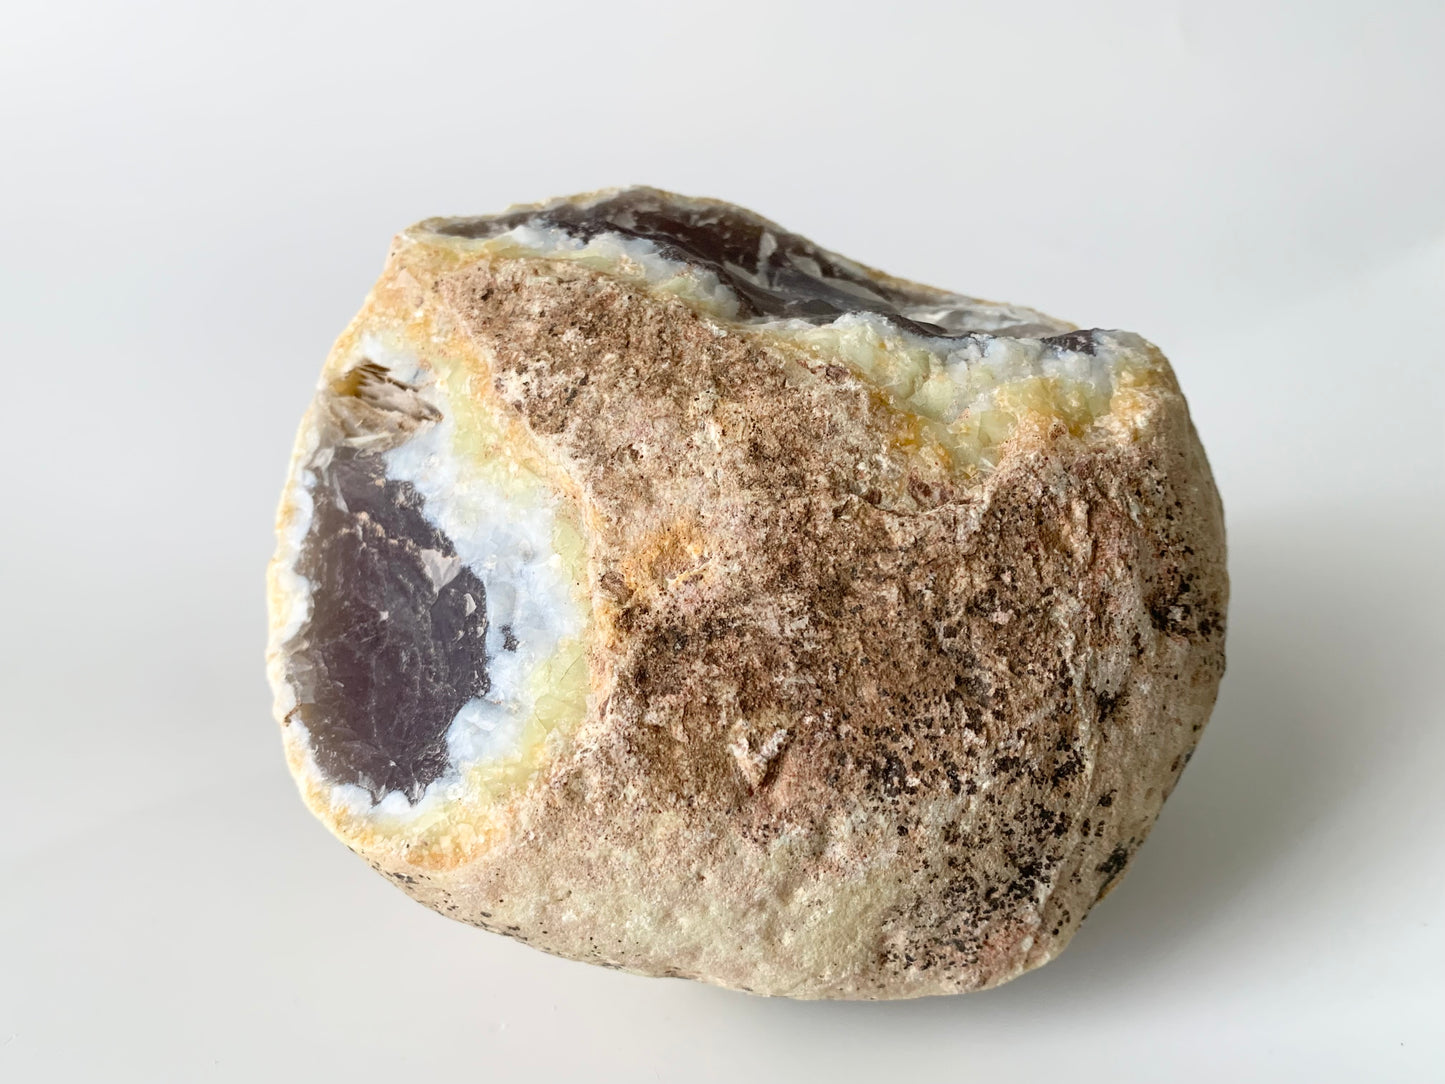 Whole Enhydro Geode/Nodule for Cracking/Cutting